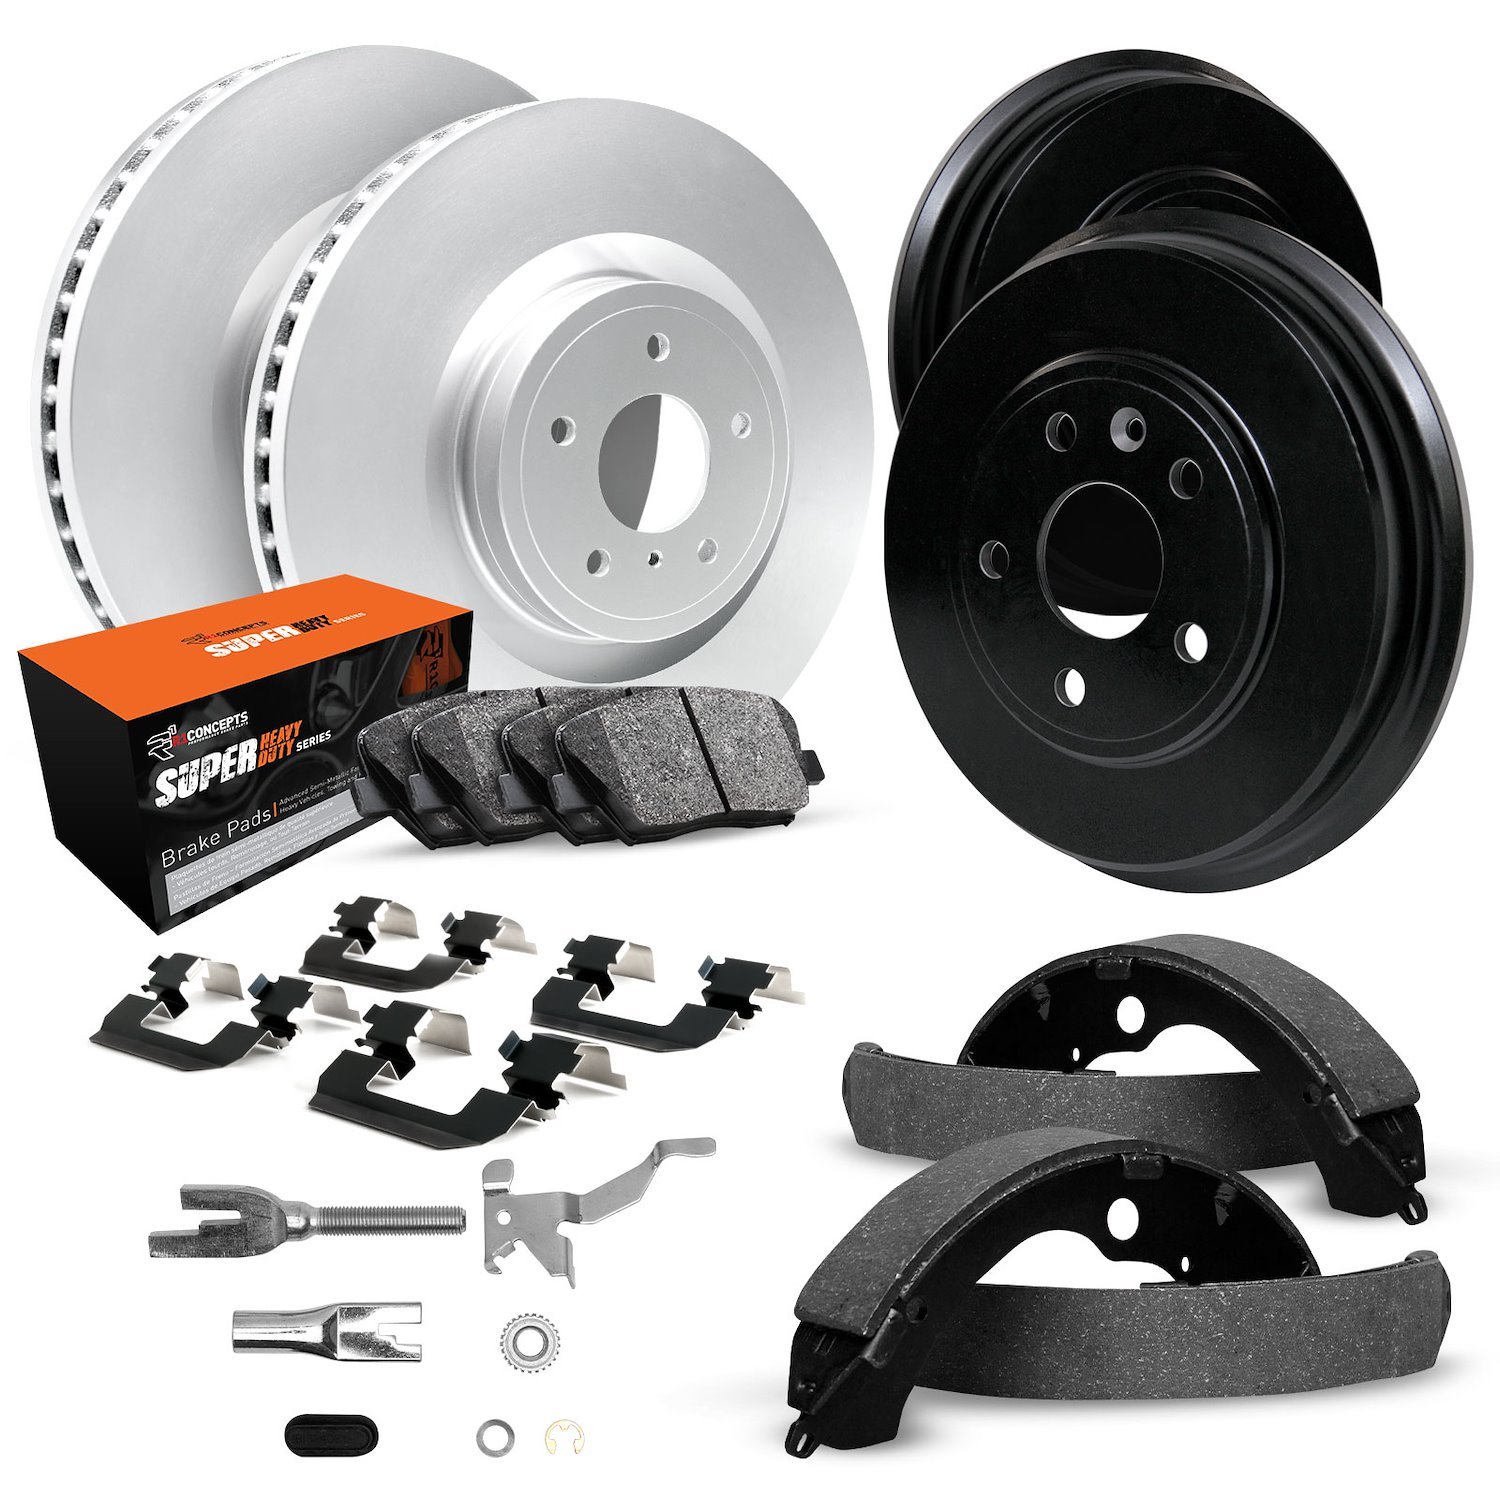 GEO-Carbon Brake Rotor & Drum Set w/Super-Duty Pads, Shoes, Hardware/Adjusters, 1990-1994 Ford/Lincoln/Mercury/Mazda